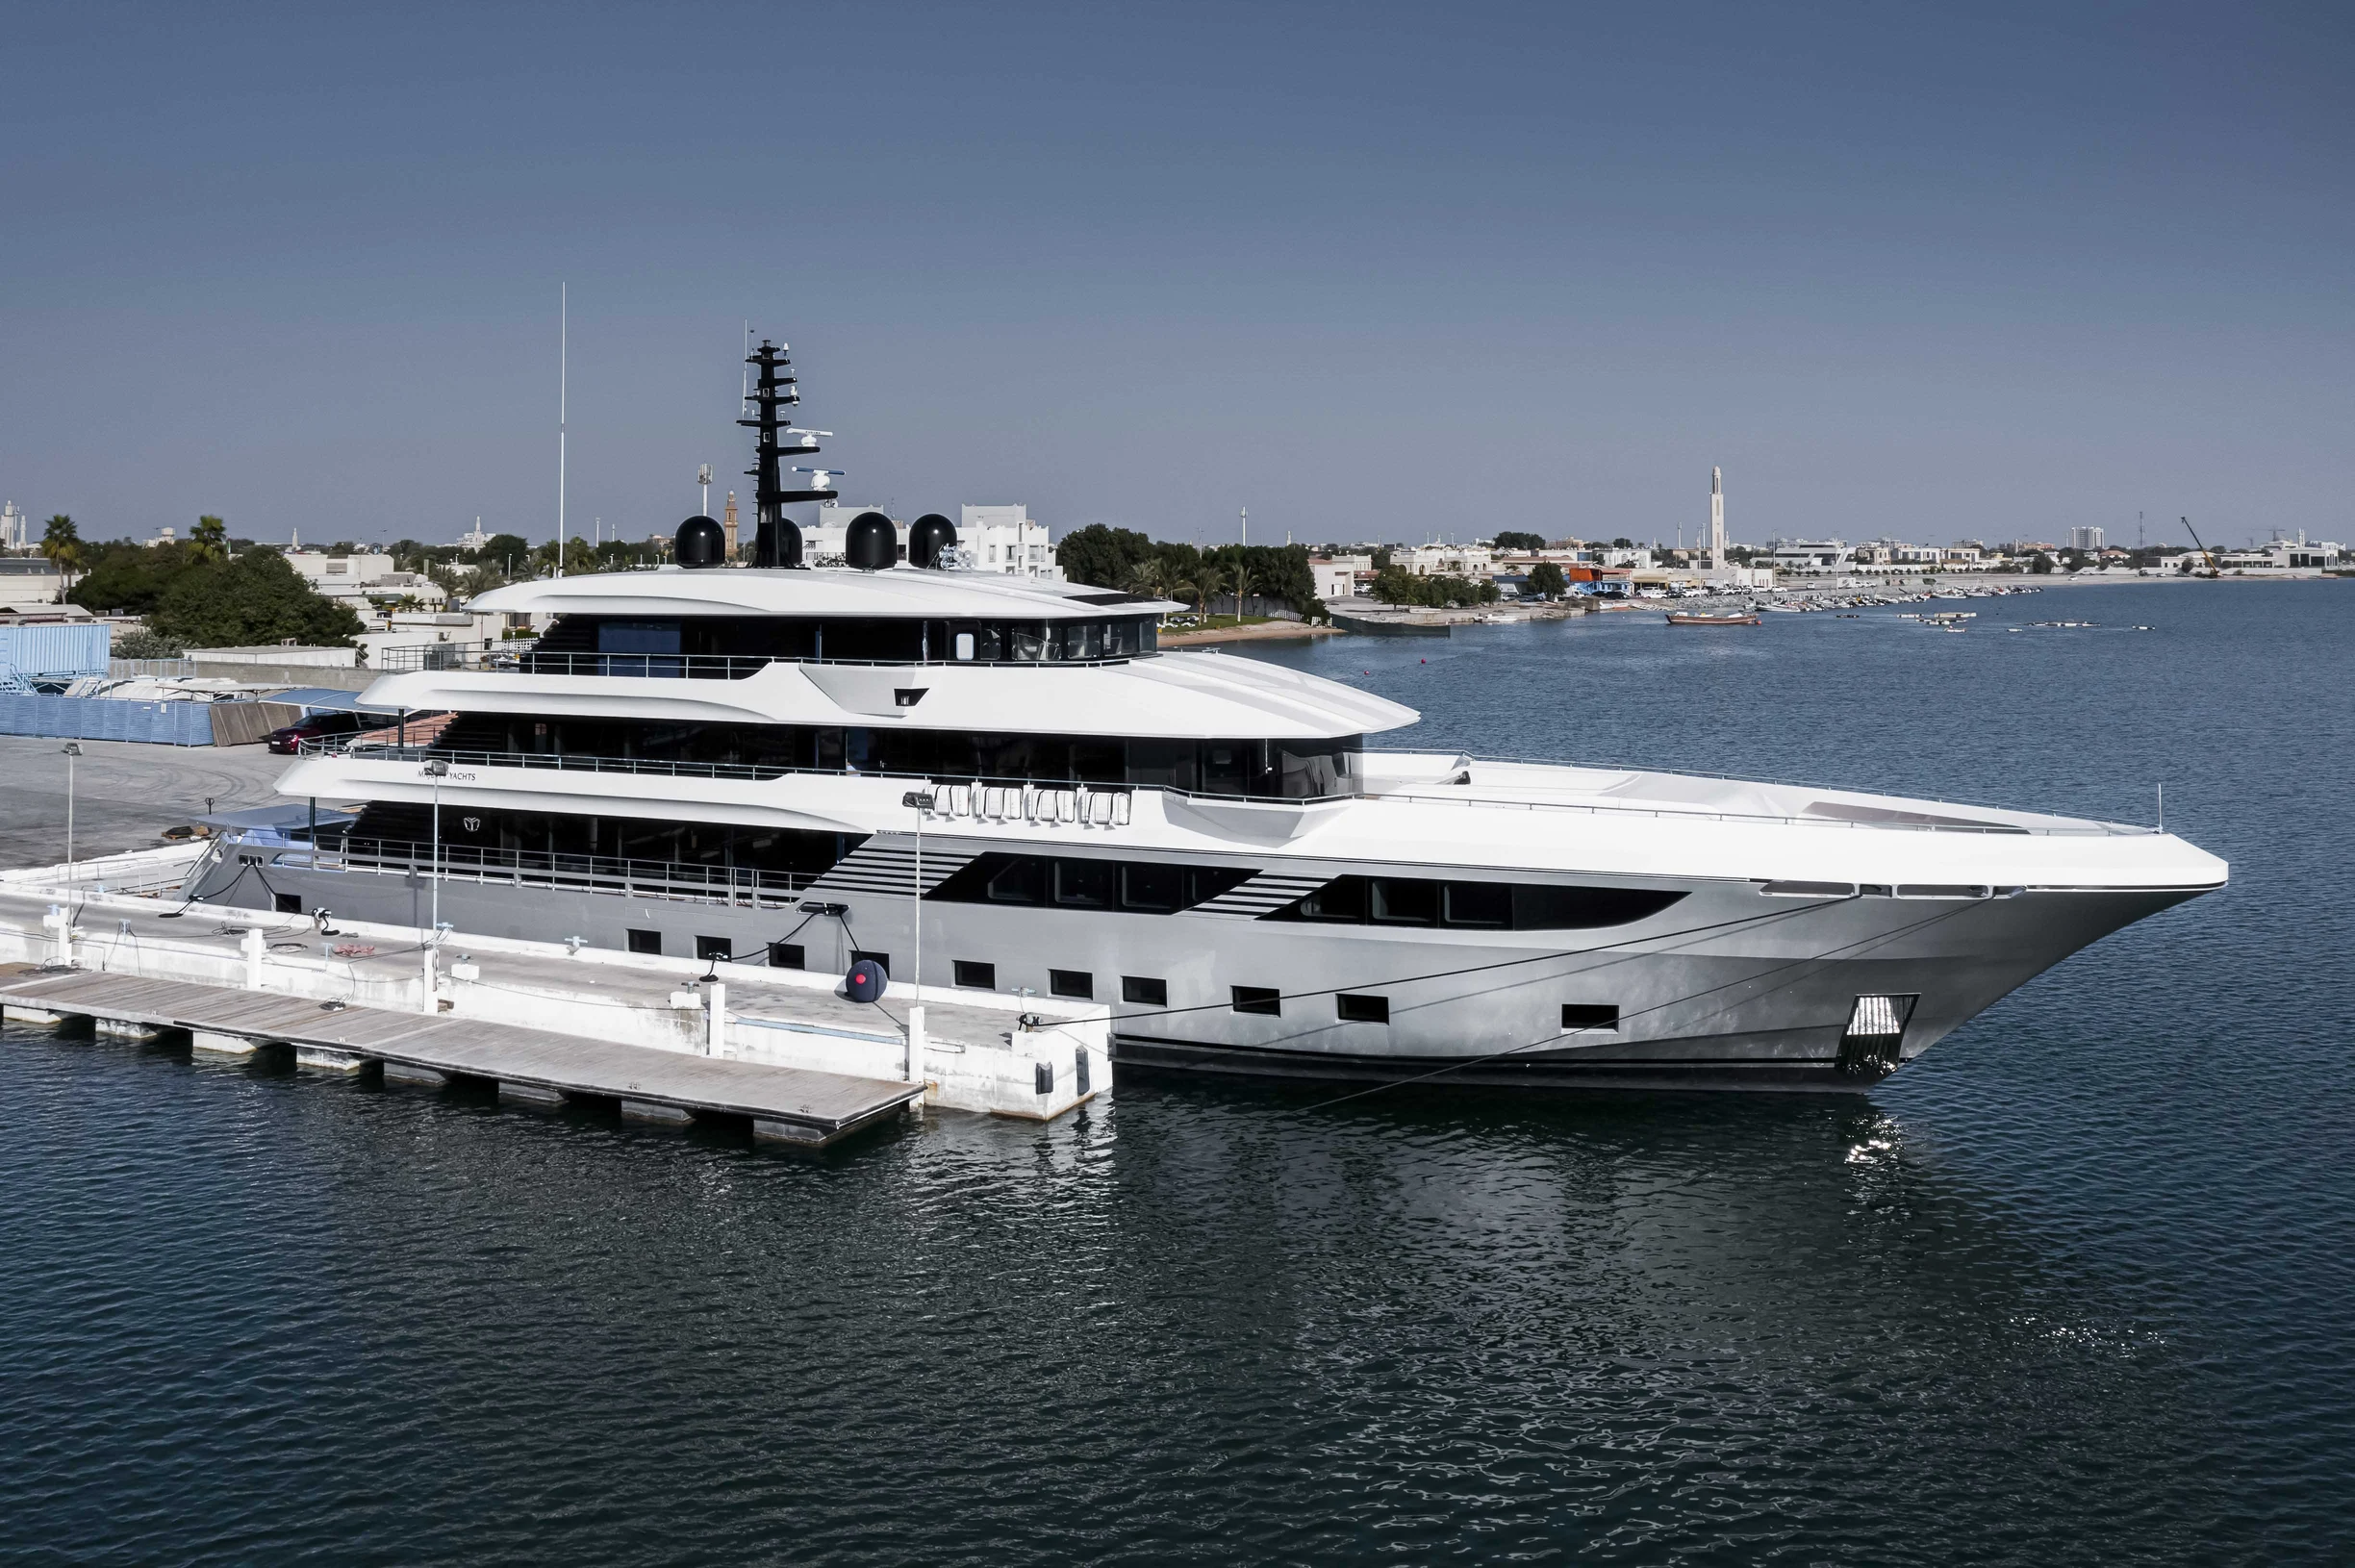 Gulf Craft Launches the World’s Largest Composite Yacht - Jim Penix Yachts